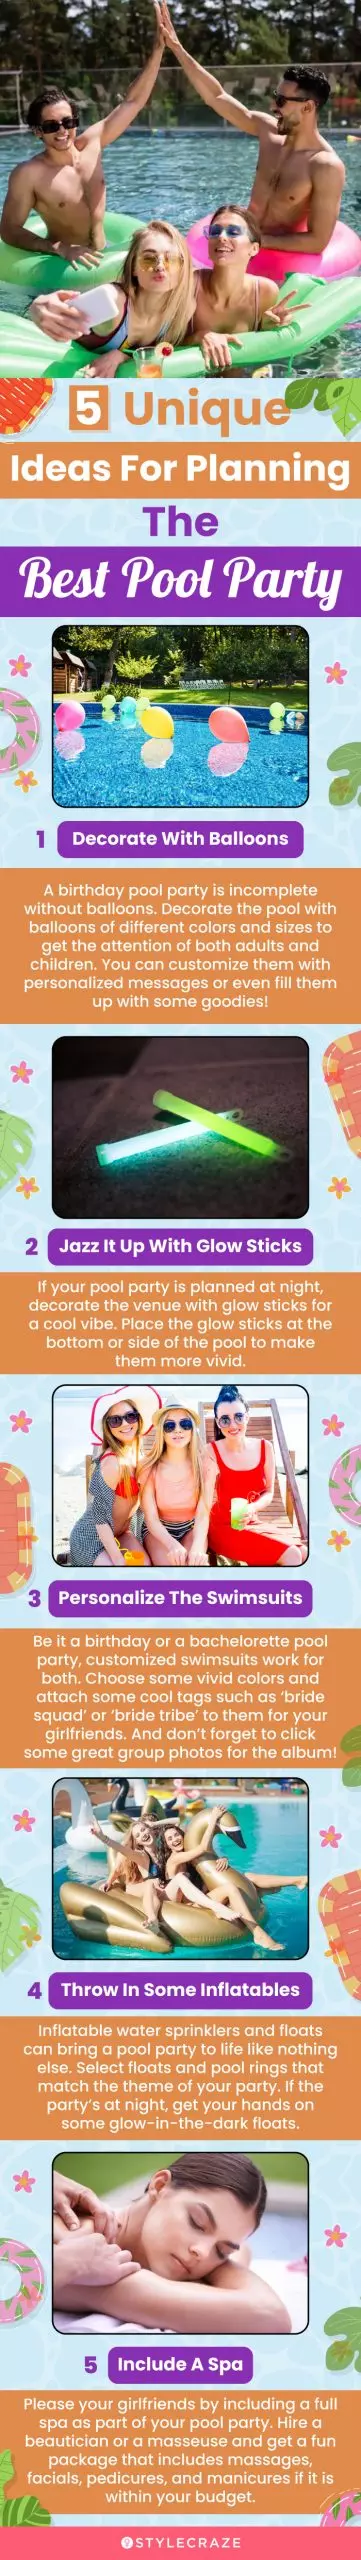 5 best pool party ideas for different occasions (infographic)